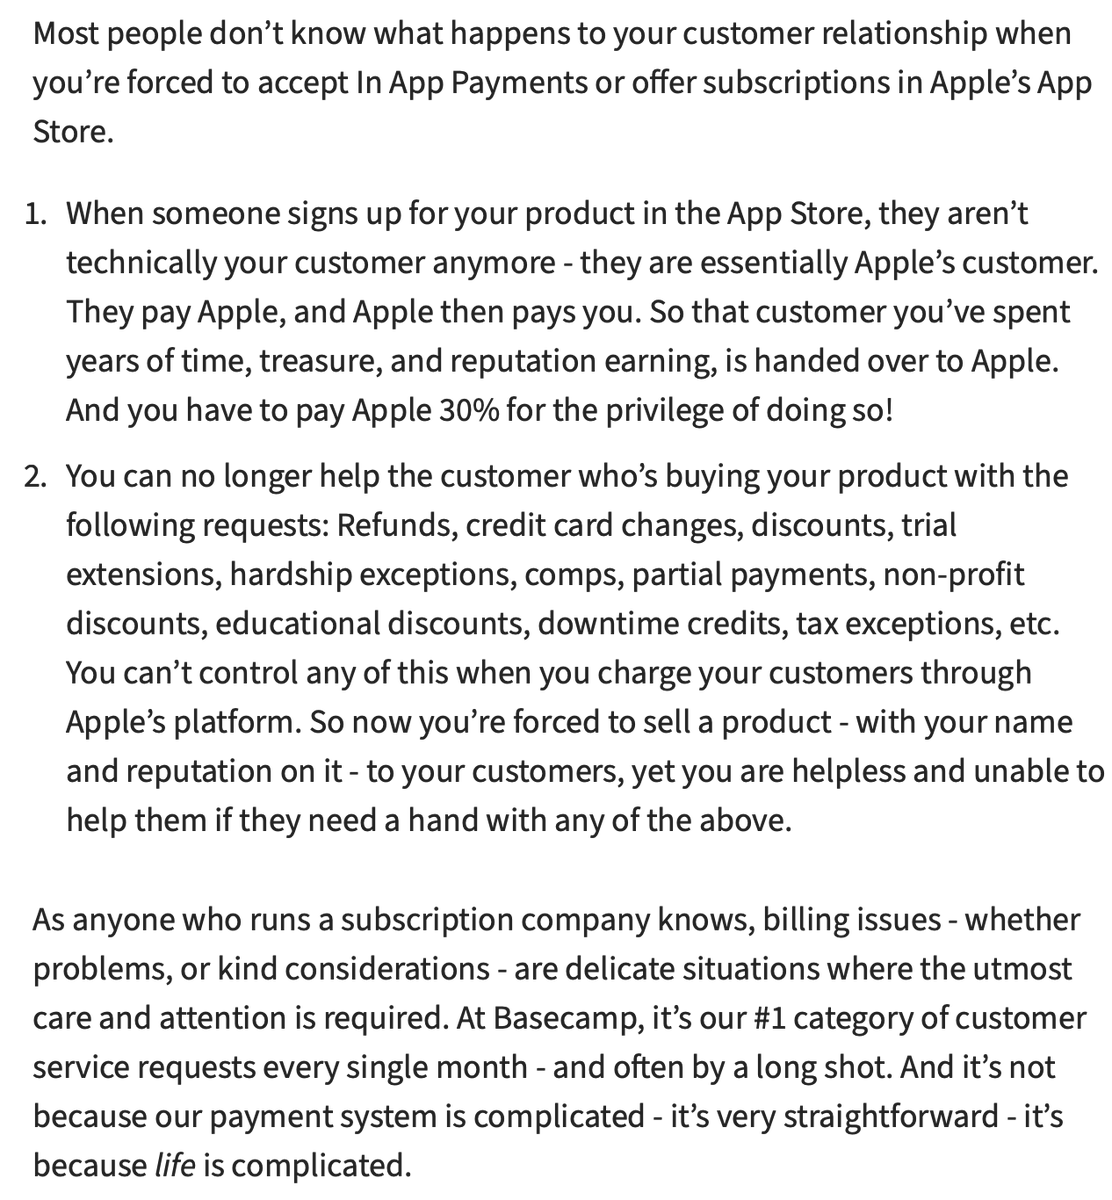 Apple has **terrible** customer service when it comes to many forms of software billing. It's inflexible, slow, inscrutable, and unserviceable by software makers. We spelled this out in detail when they were holding HEY for ransom.  https://hey.com/apple/iap/ 